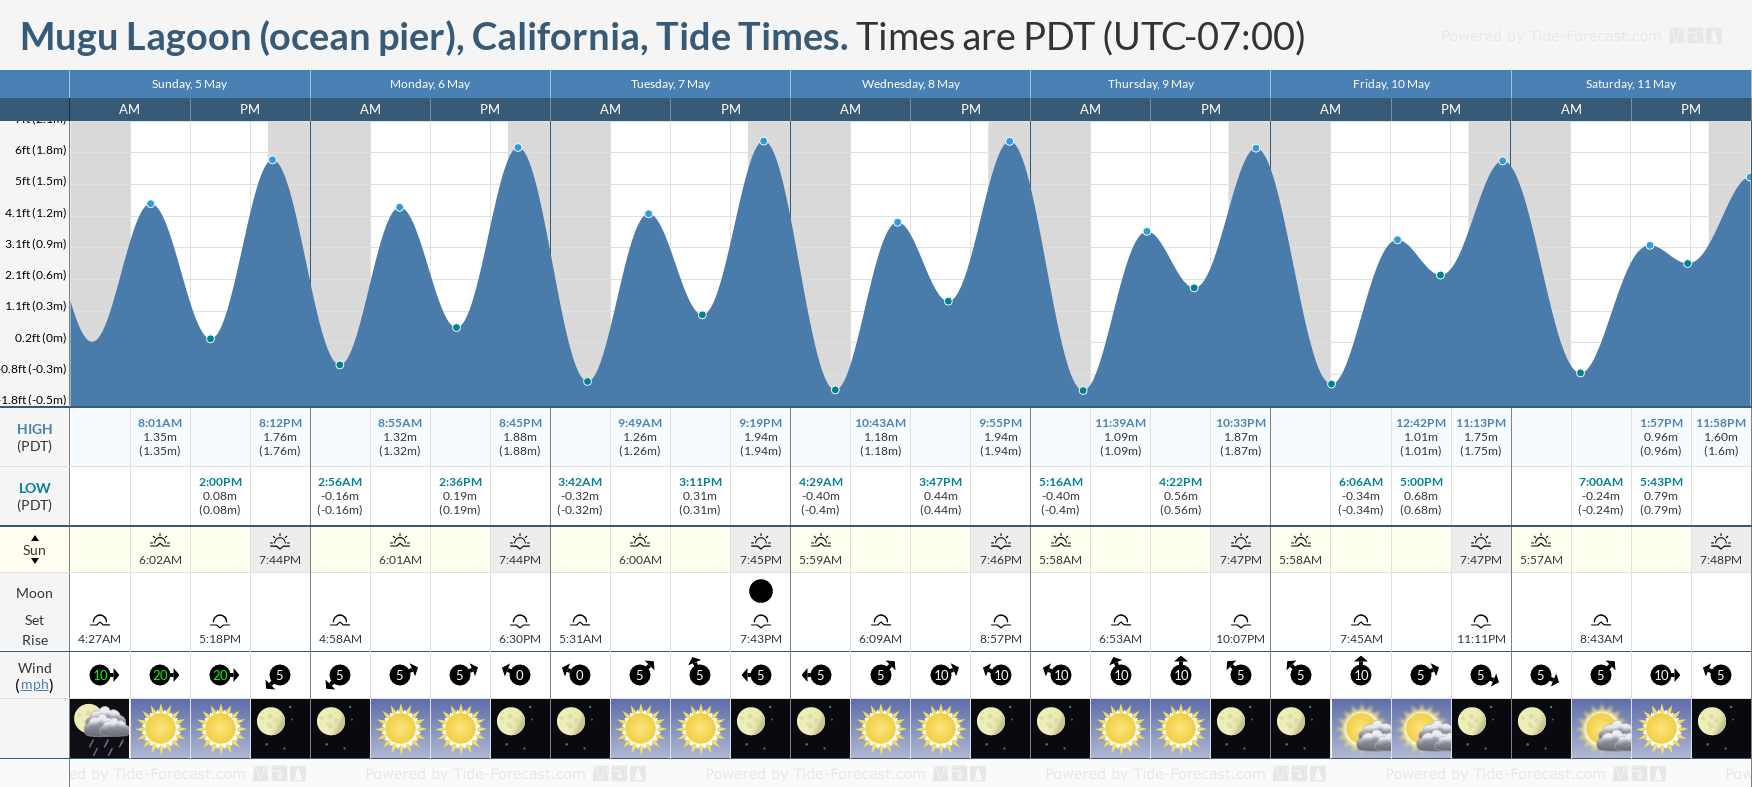 Mugu Lagoon (ocean pier), California Tide Chart including high and low tide tide times for the next 7 days